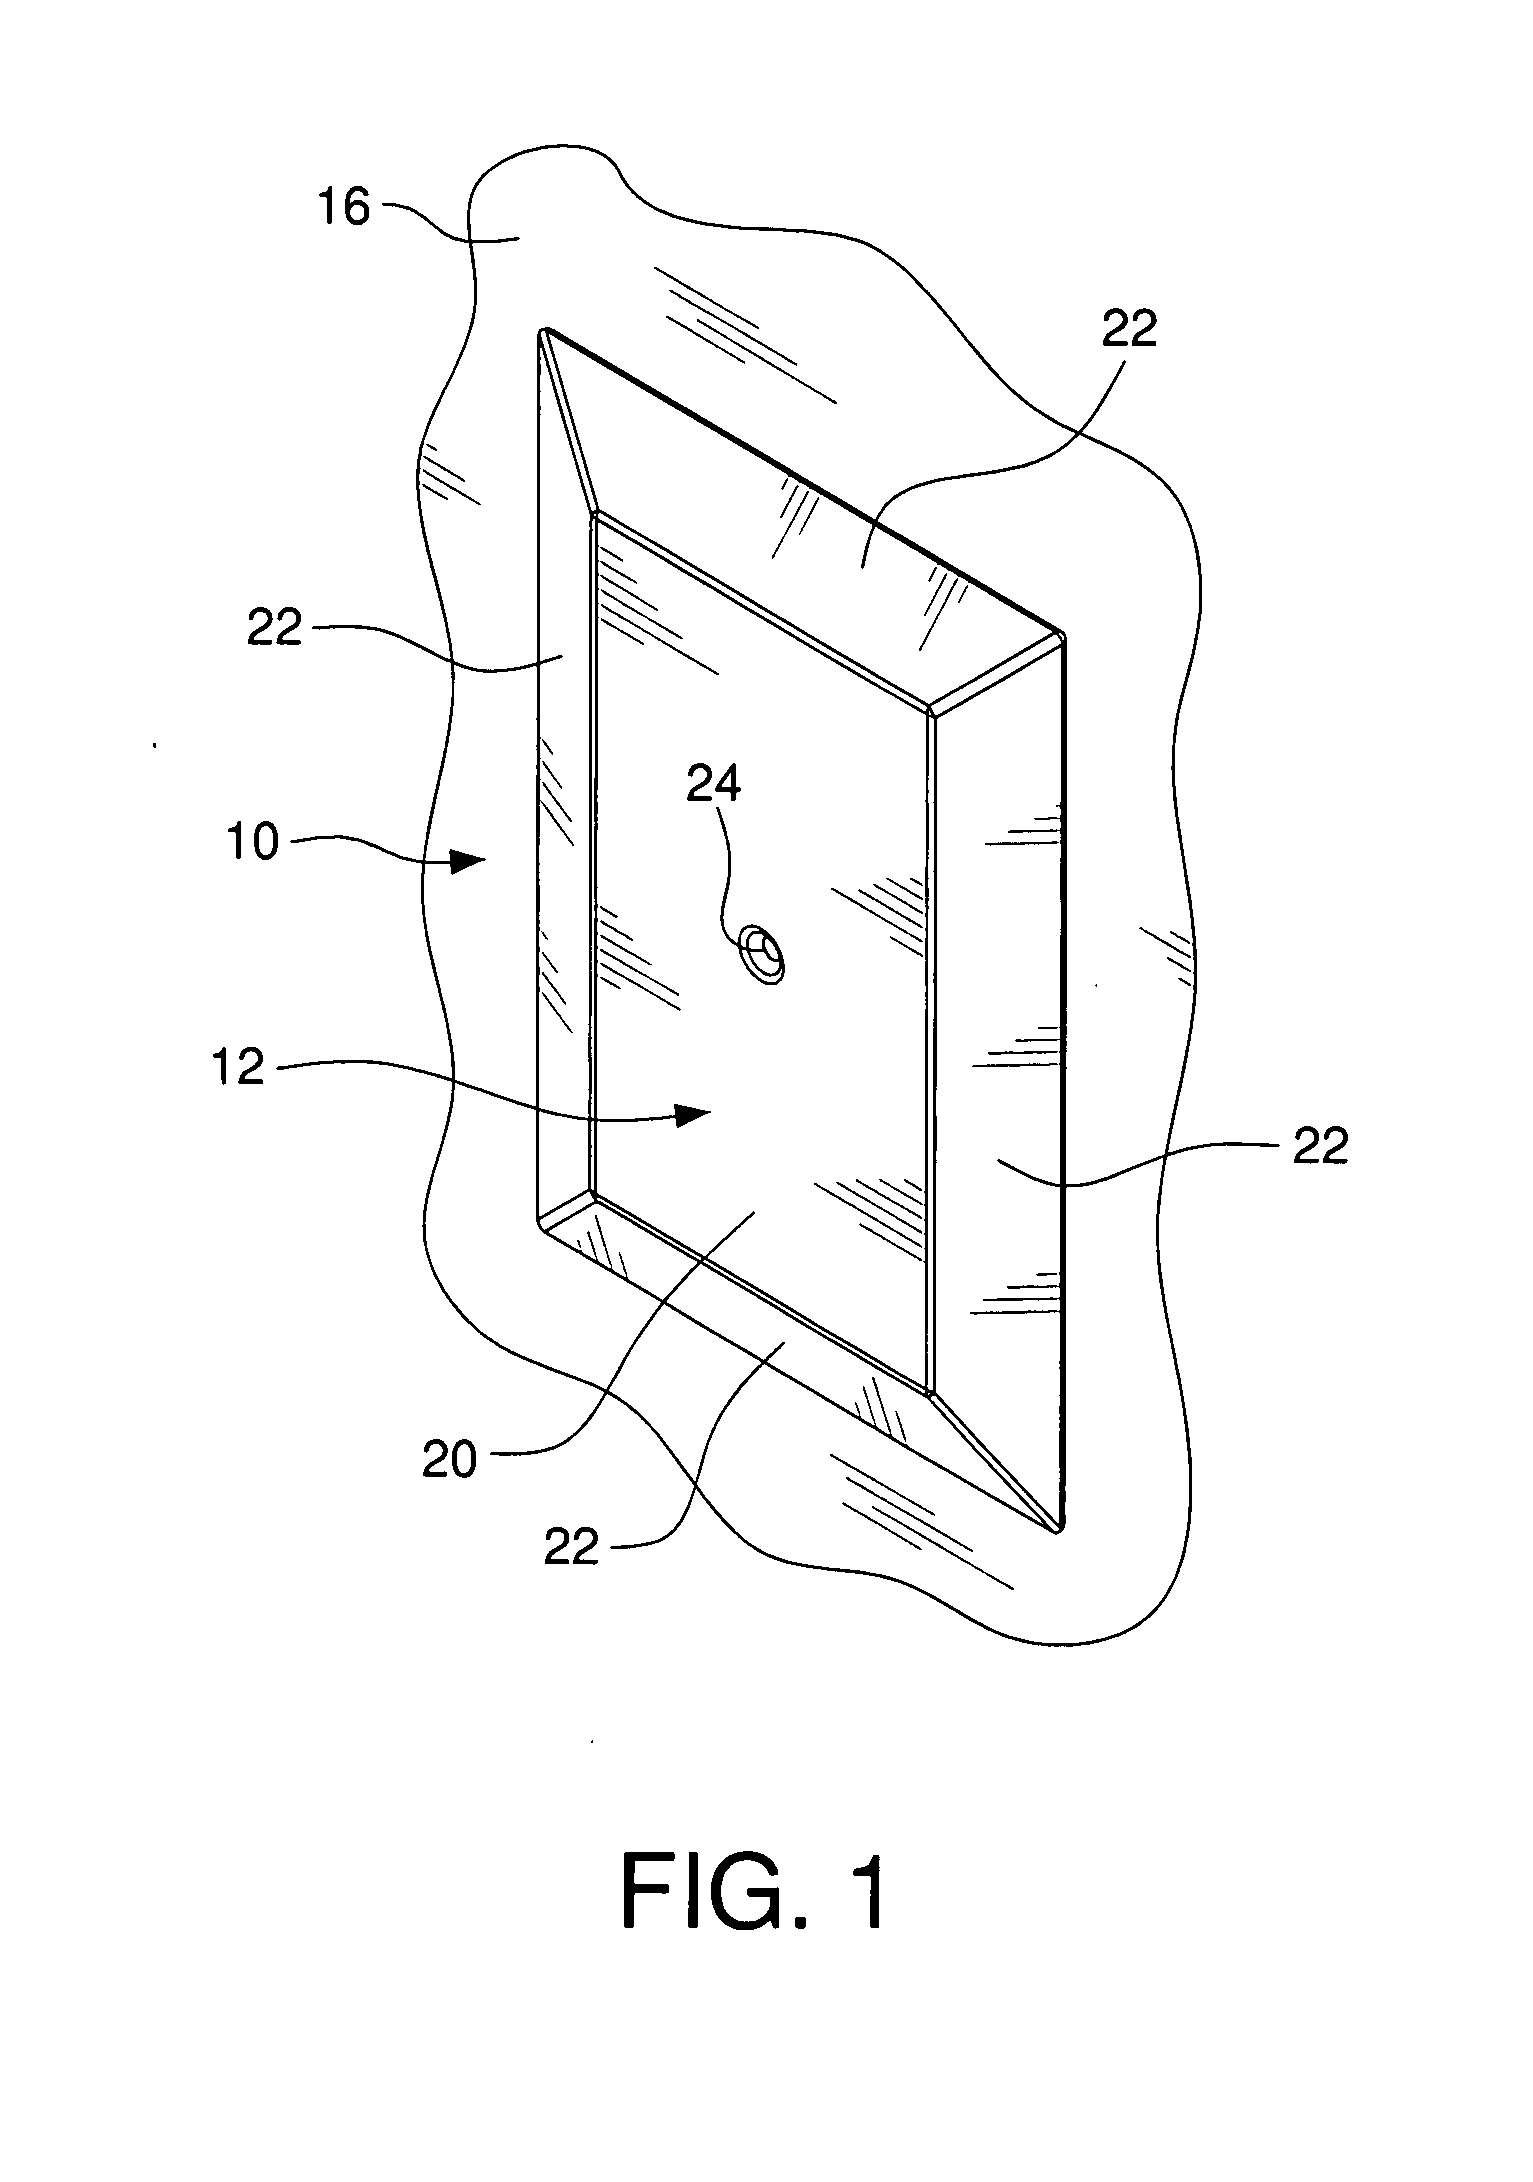 Tamper resistant electrical outlet cover assembly